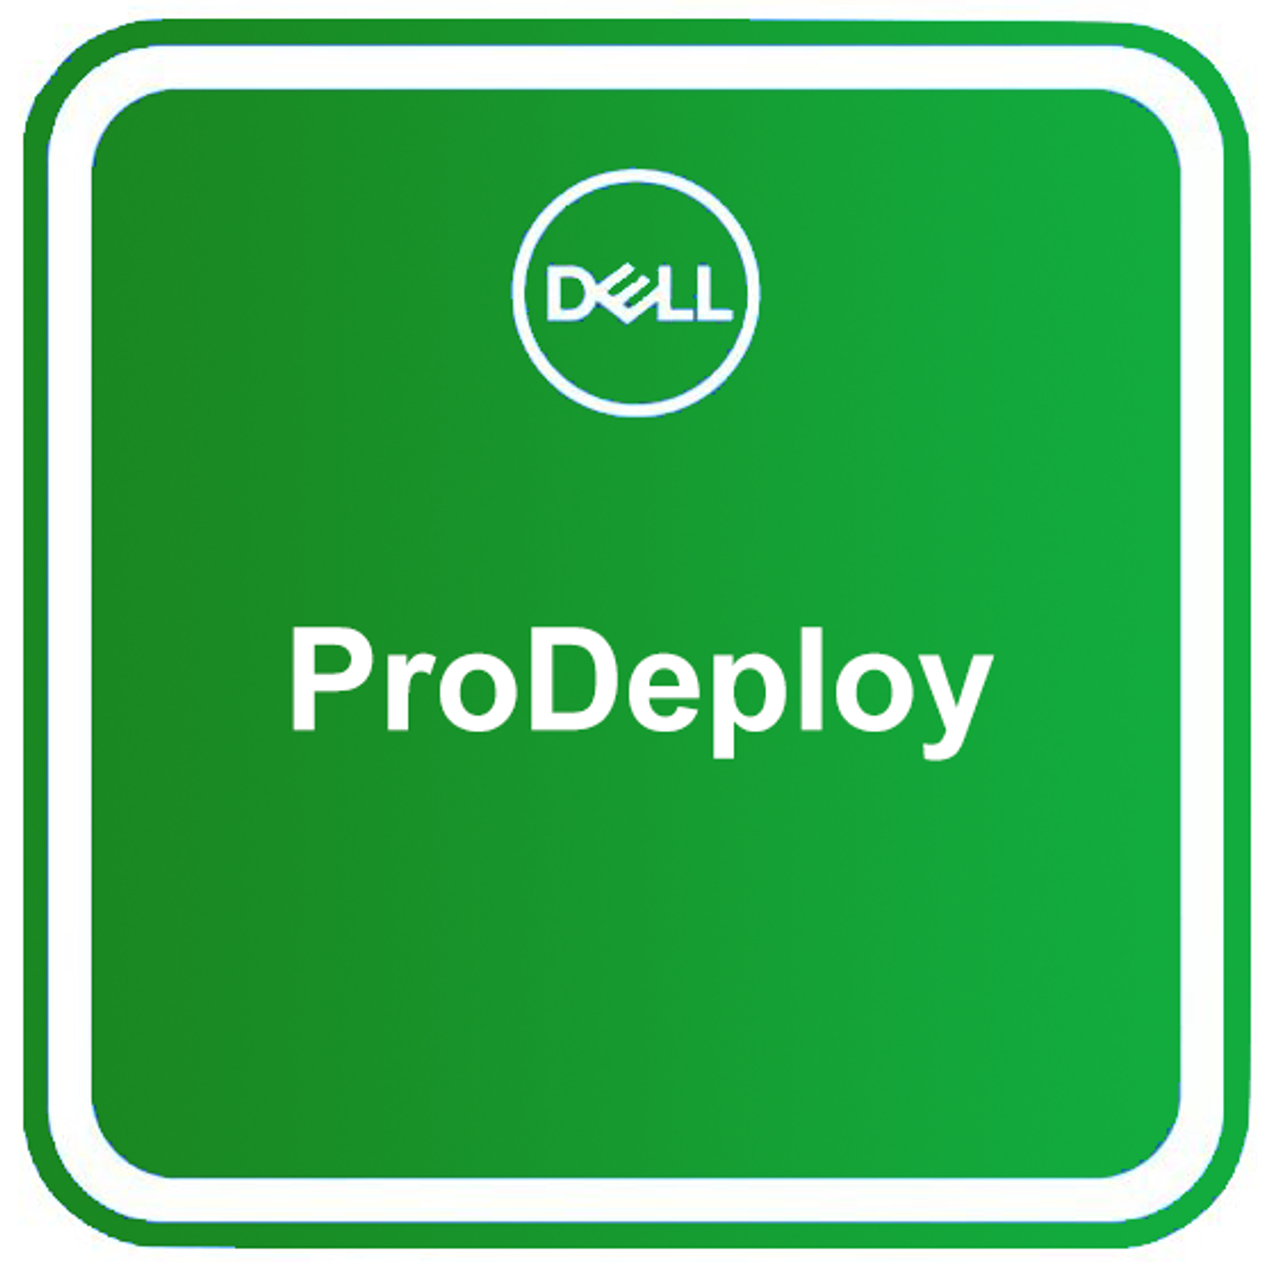 Dell ProDeploy Tracking Model